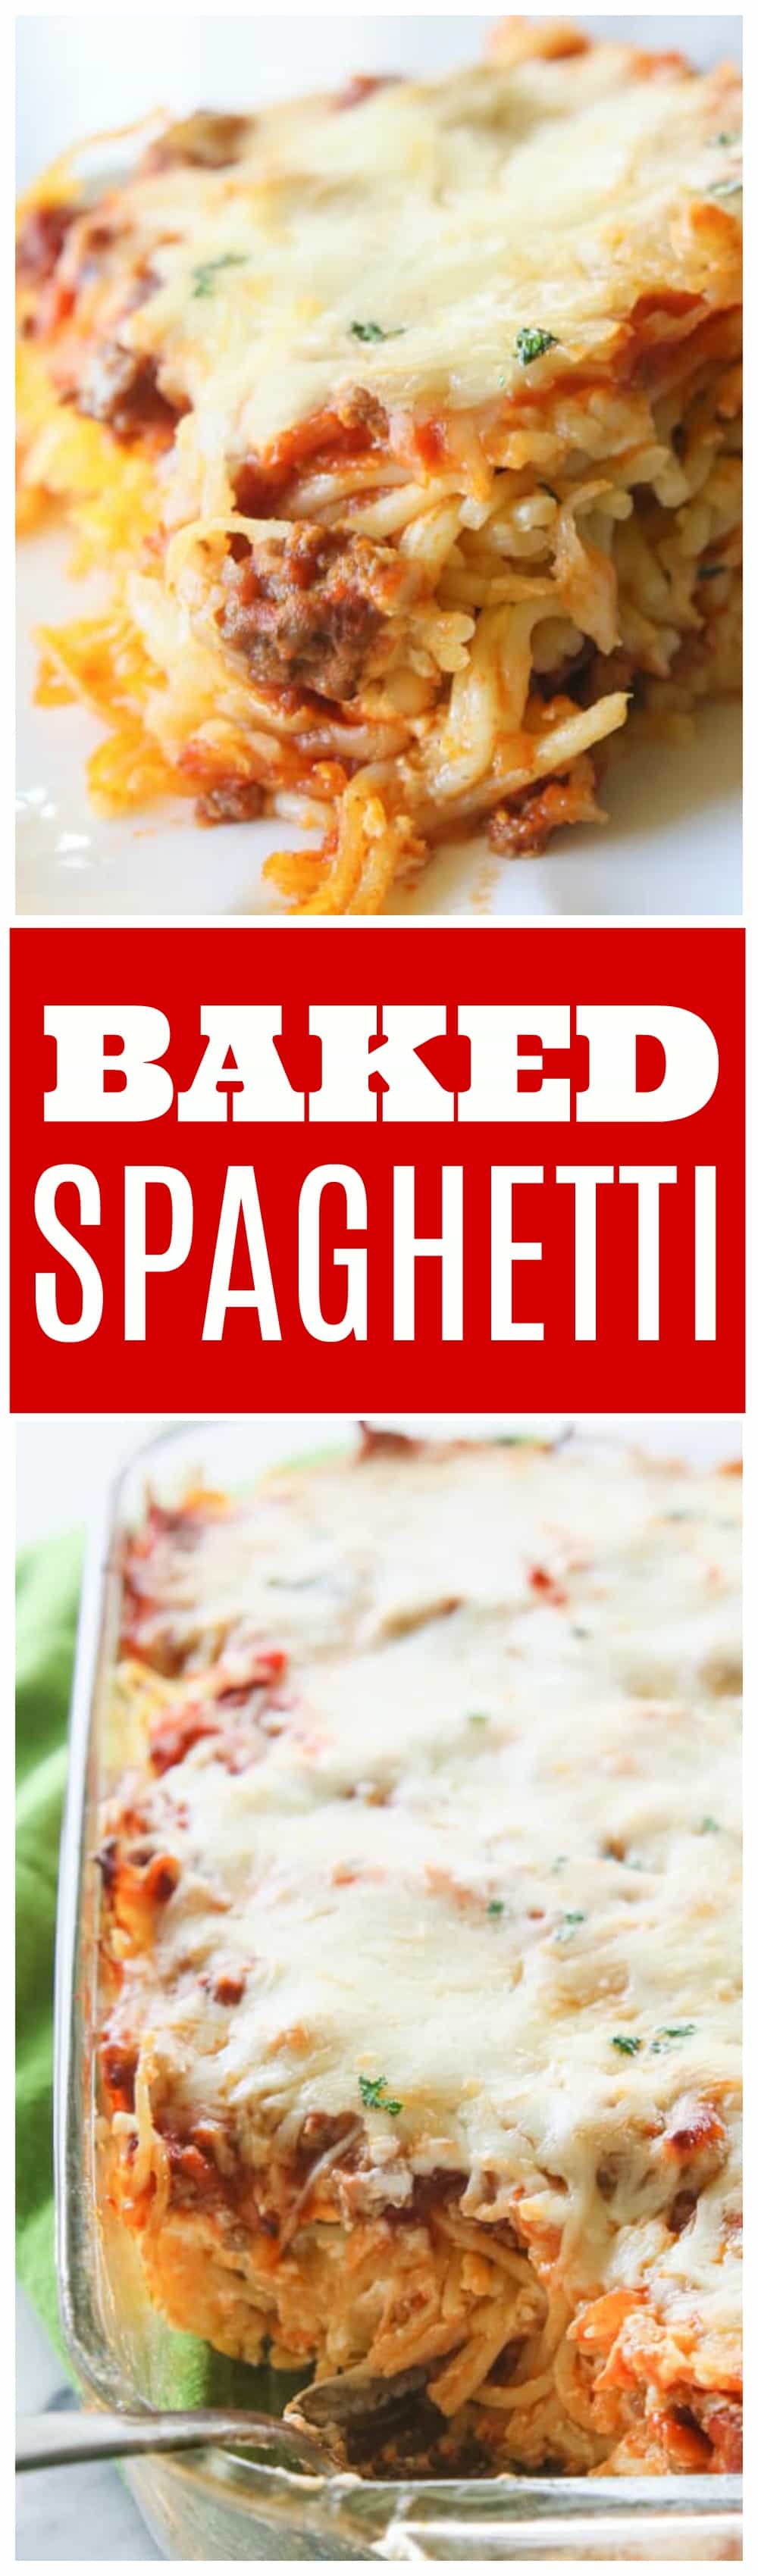 Baked Spaghetti - The Girl Who Ate Everything